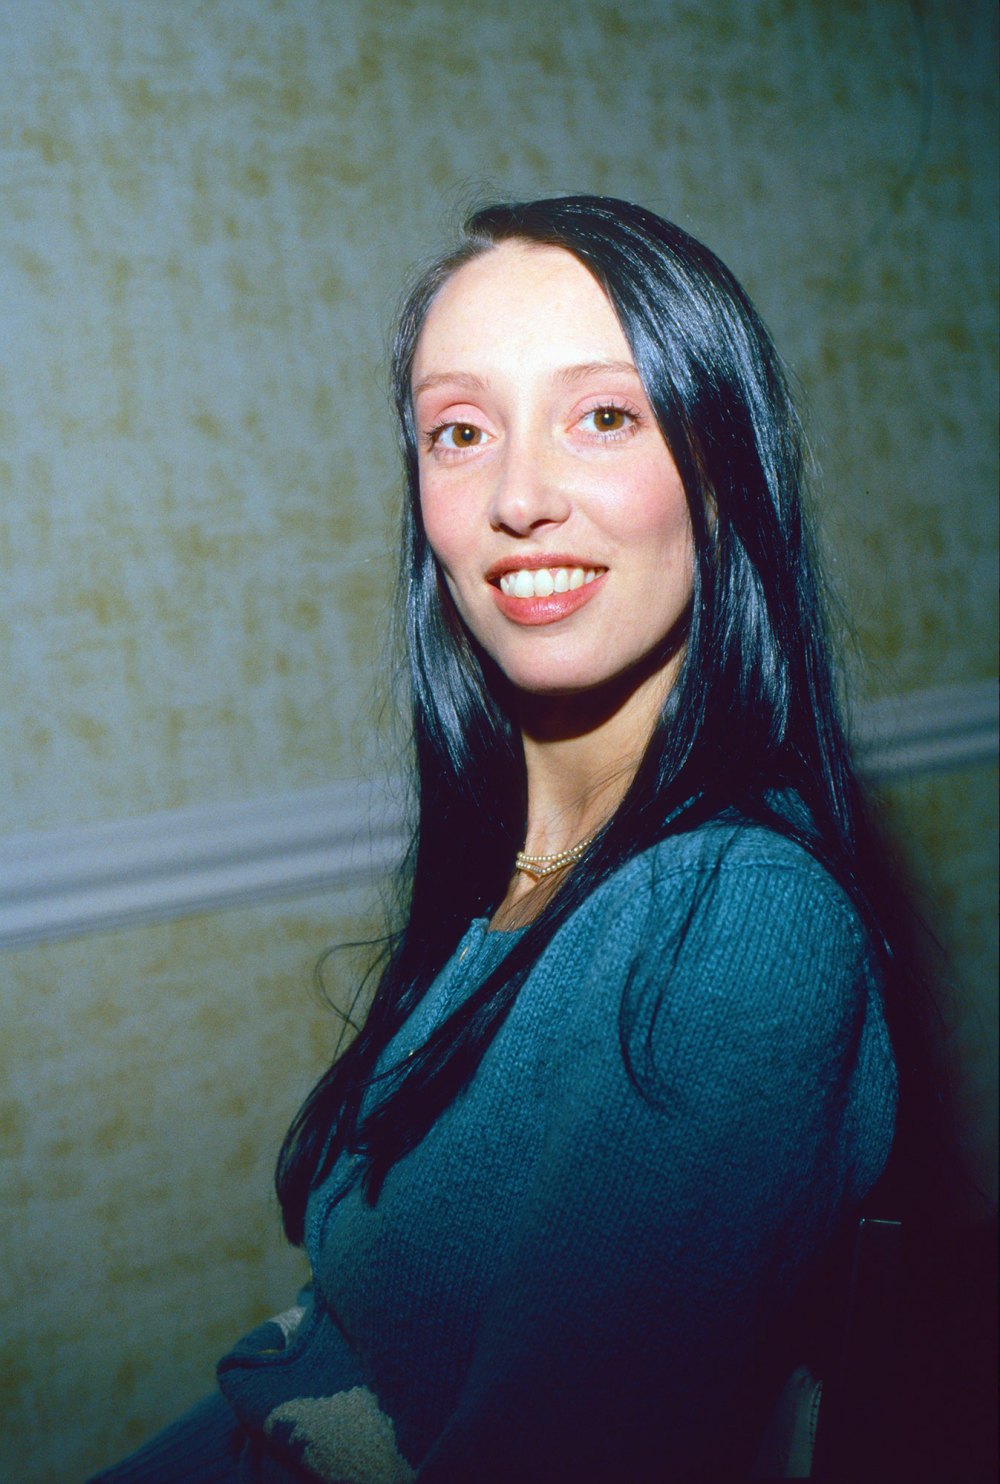 Dr. Phil’s Shelley Duvall Interview Slammed as ‘Exploitative’ By Stanley Kubrick’s Daughter Vivian